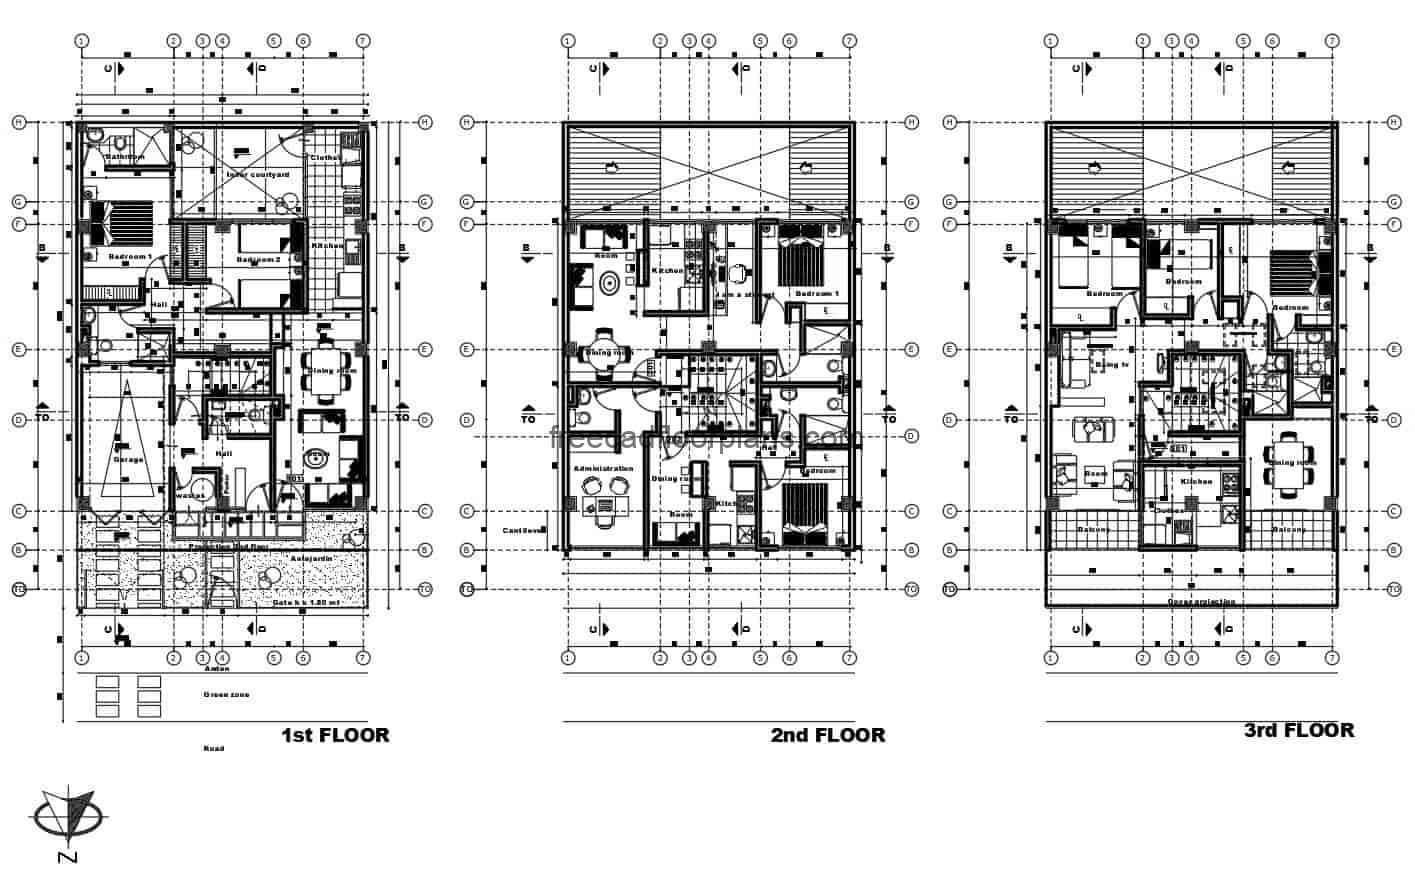 Housing project of three levels of independent houses, architectural plans, dimensions and foundation details in Autocad DWG plans for free download. Each house has a social area with living room, kitchen, dining room and three bedrooms.